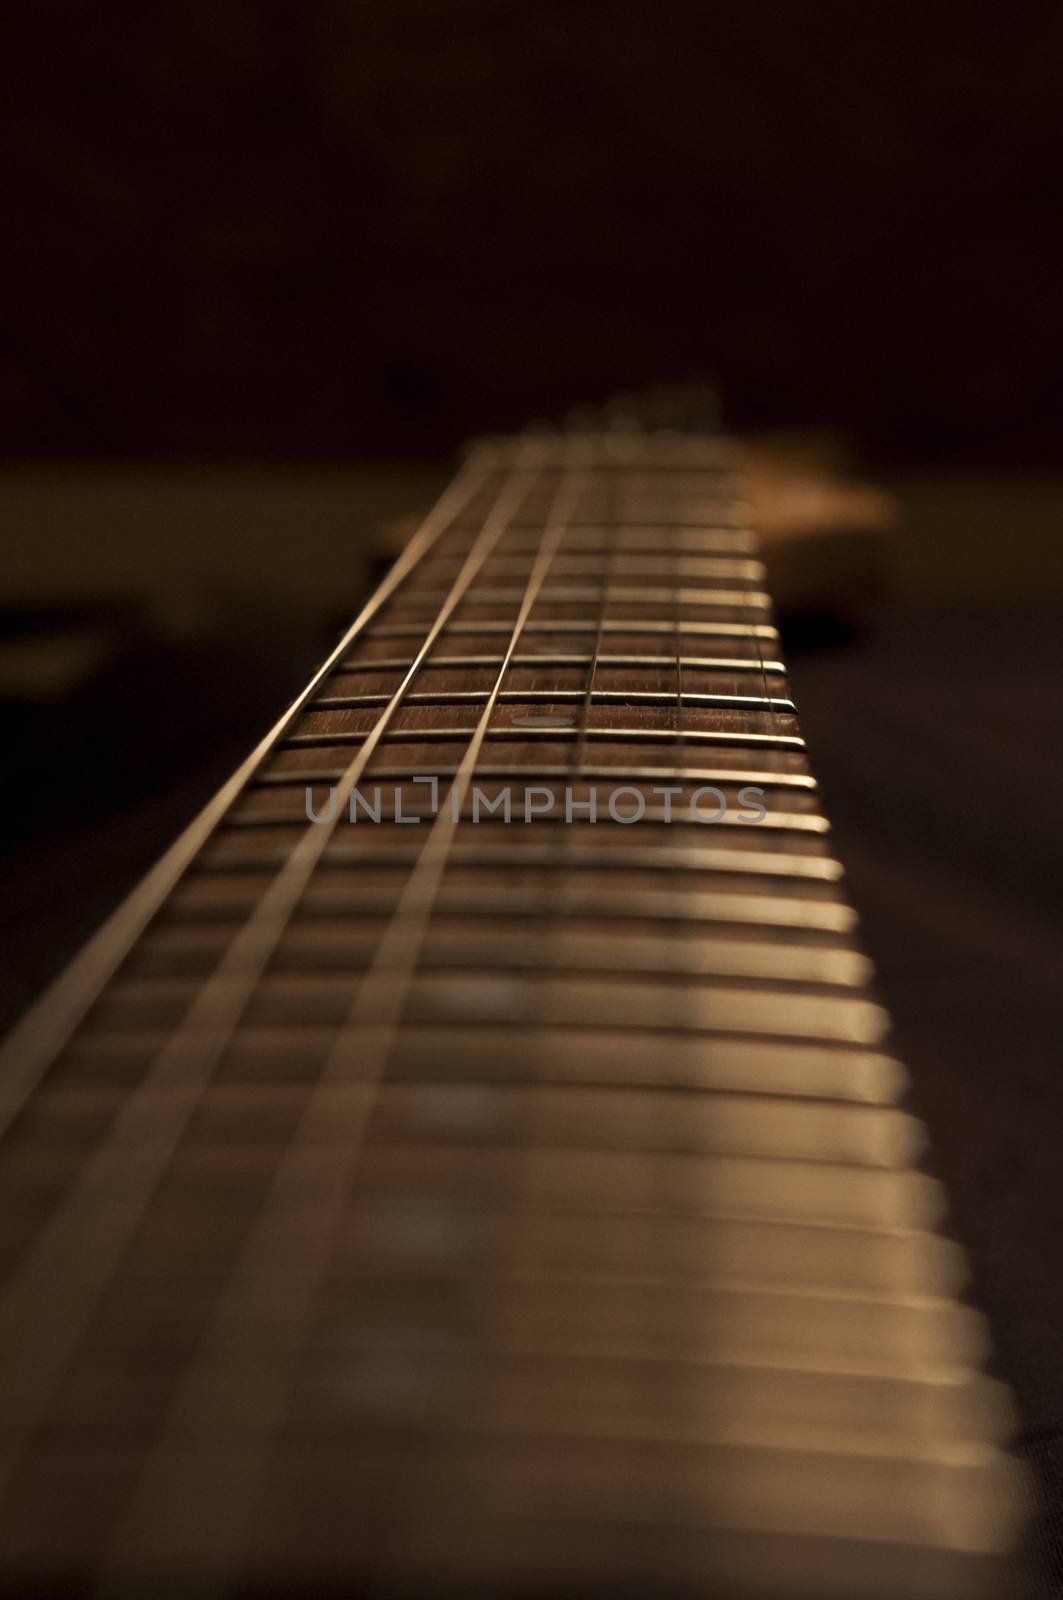 View of a guitar neck with tight depth of field and low angle